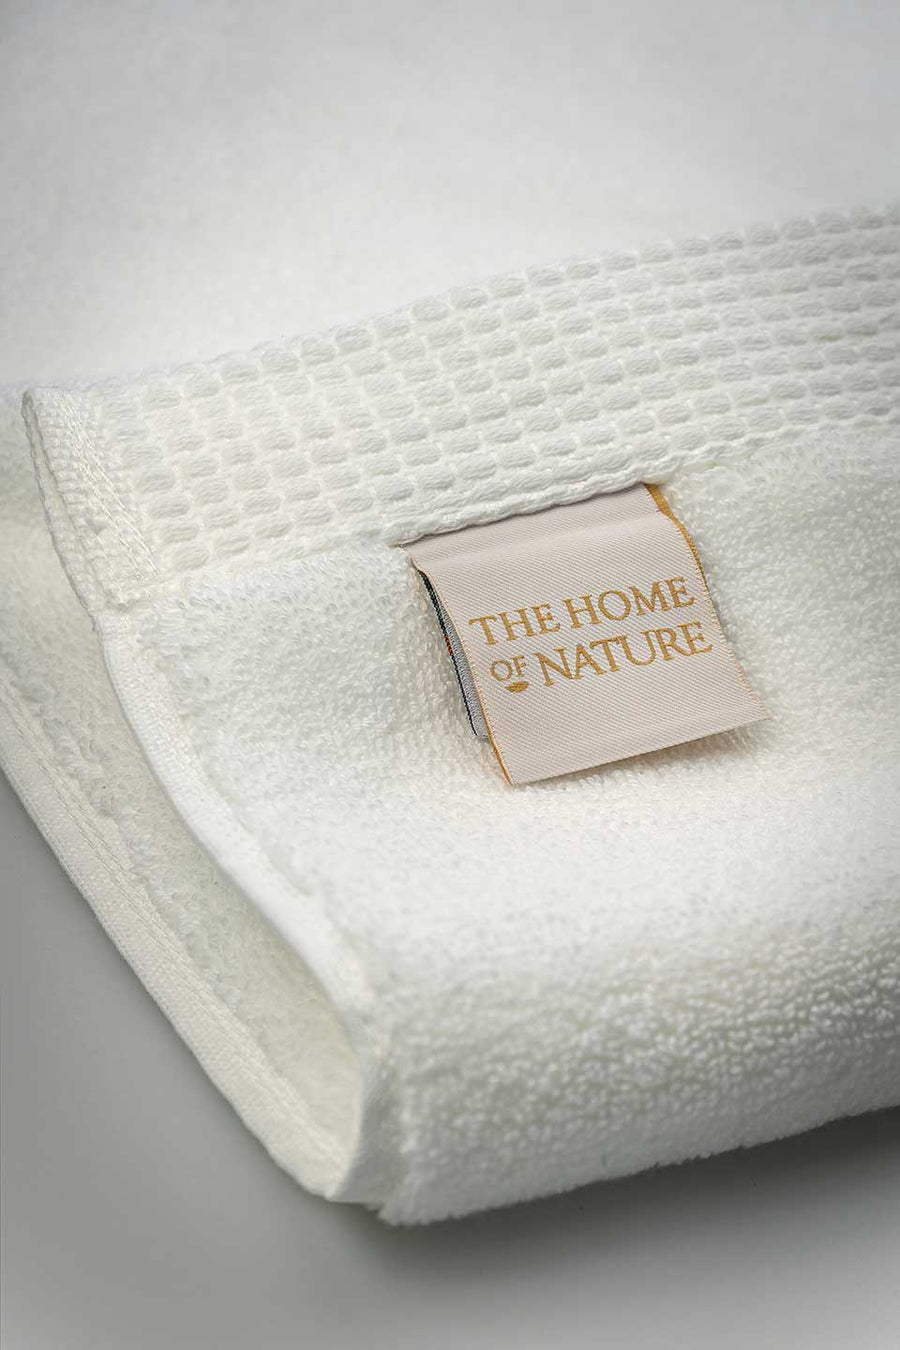 The Home of Nature label on a white Egyptian Cotton™ Bath Mat.